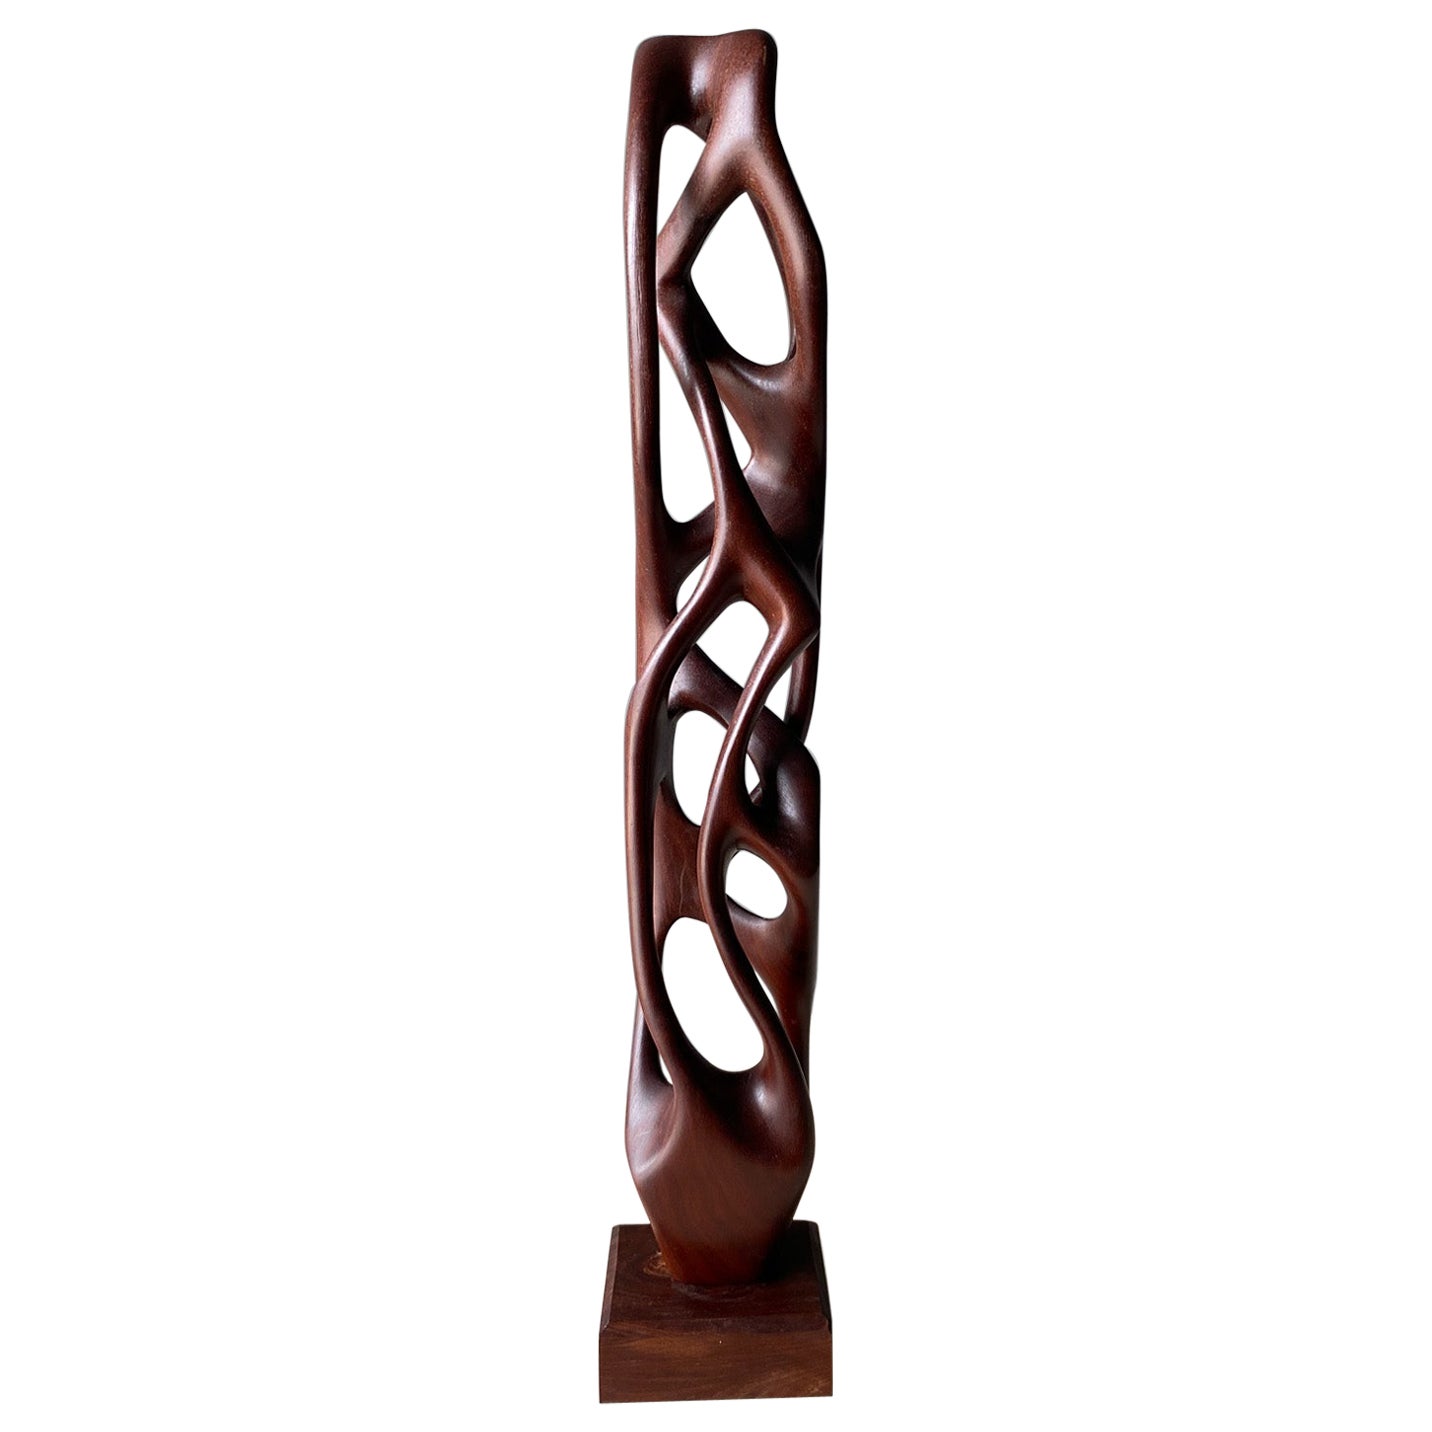 Hand Carved Biomorphic Wooden Sculpture 